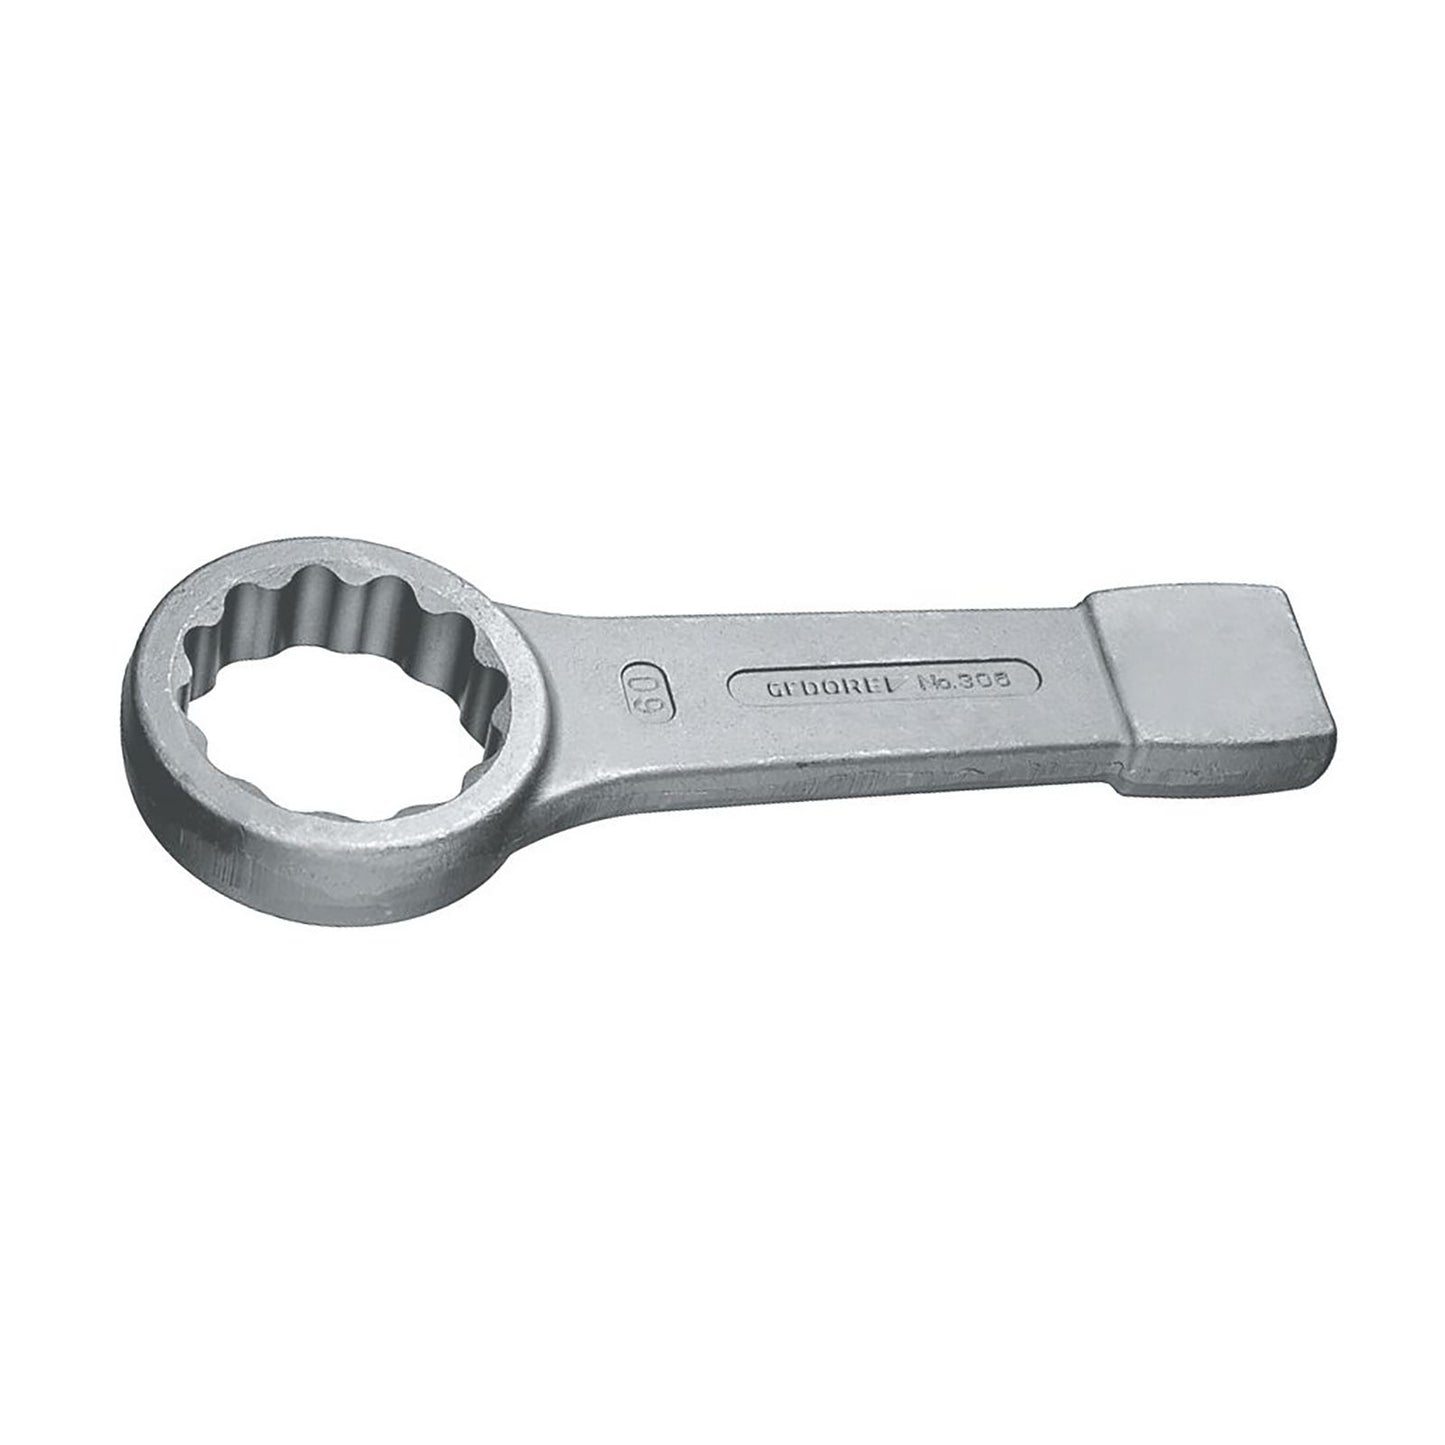 GEDORE 306 115 - Closed Strike Wrench, 115mm (6477130)